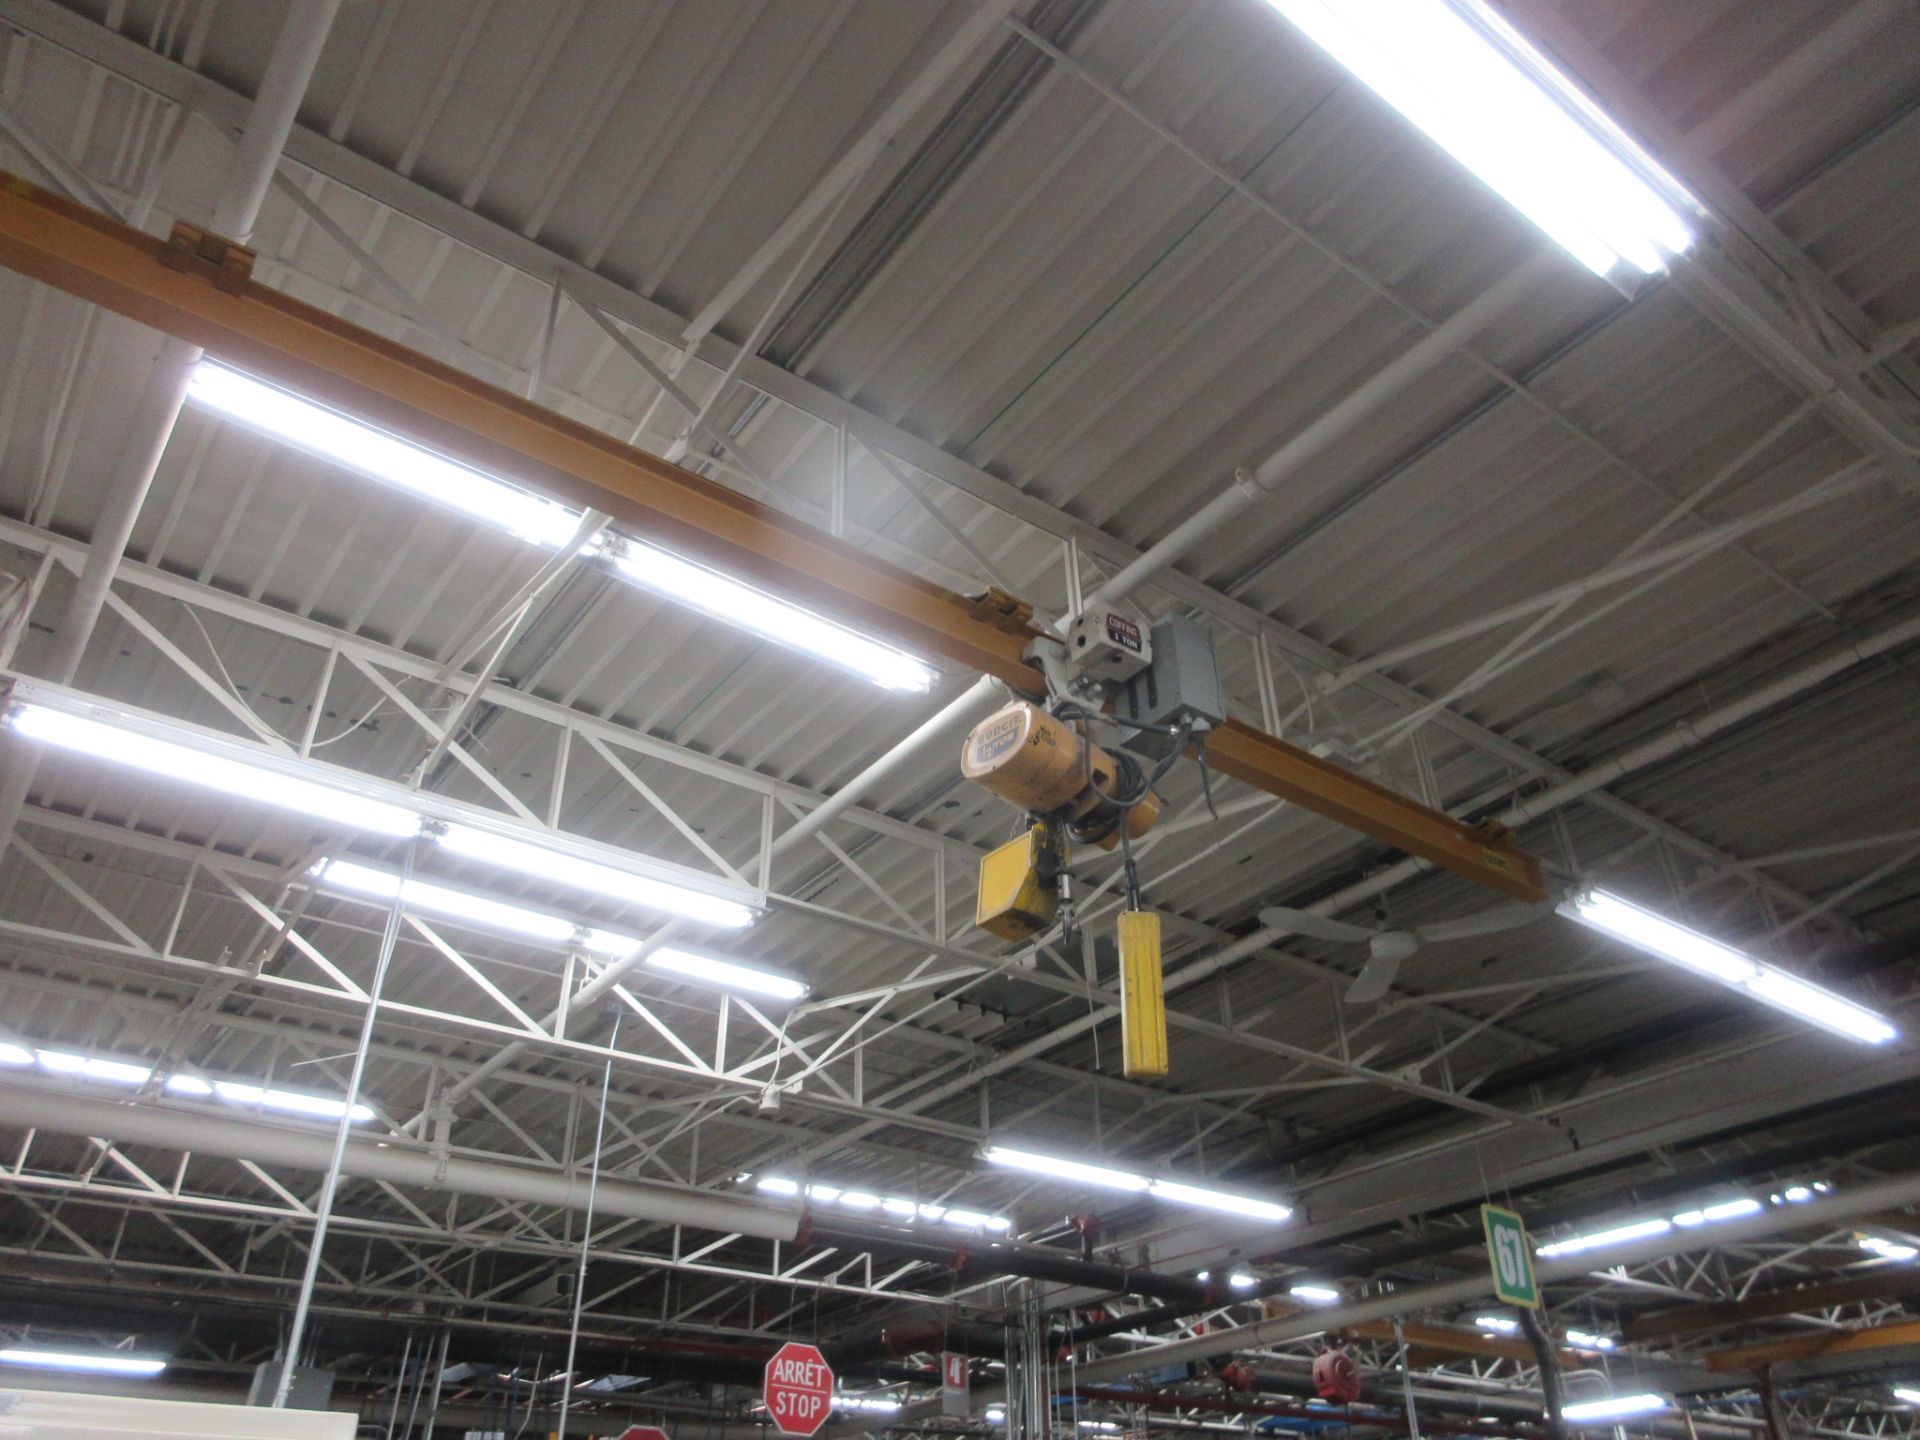 COFFING 1/2-TON CAP. ELECTRIC HOIST W/ PENDANT AND 40' I-BEAM BOLTED RUNWAY (NORTHEAST PLANT)